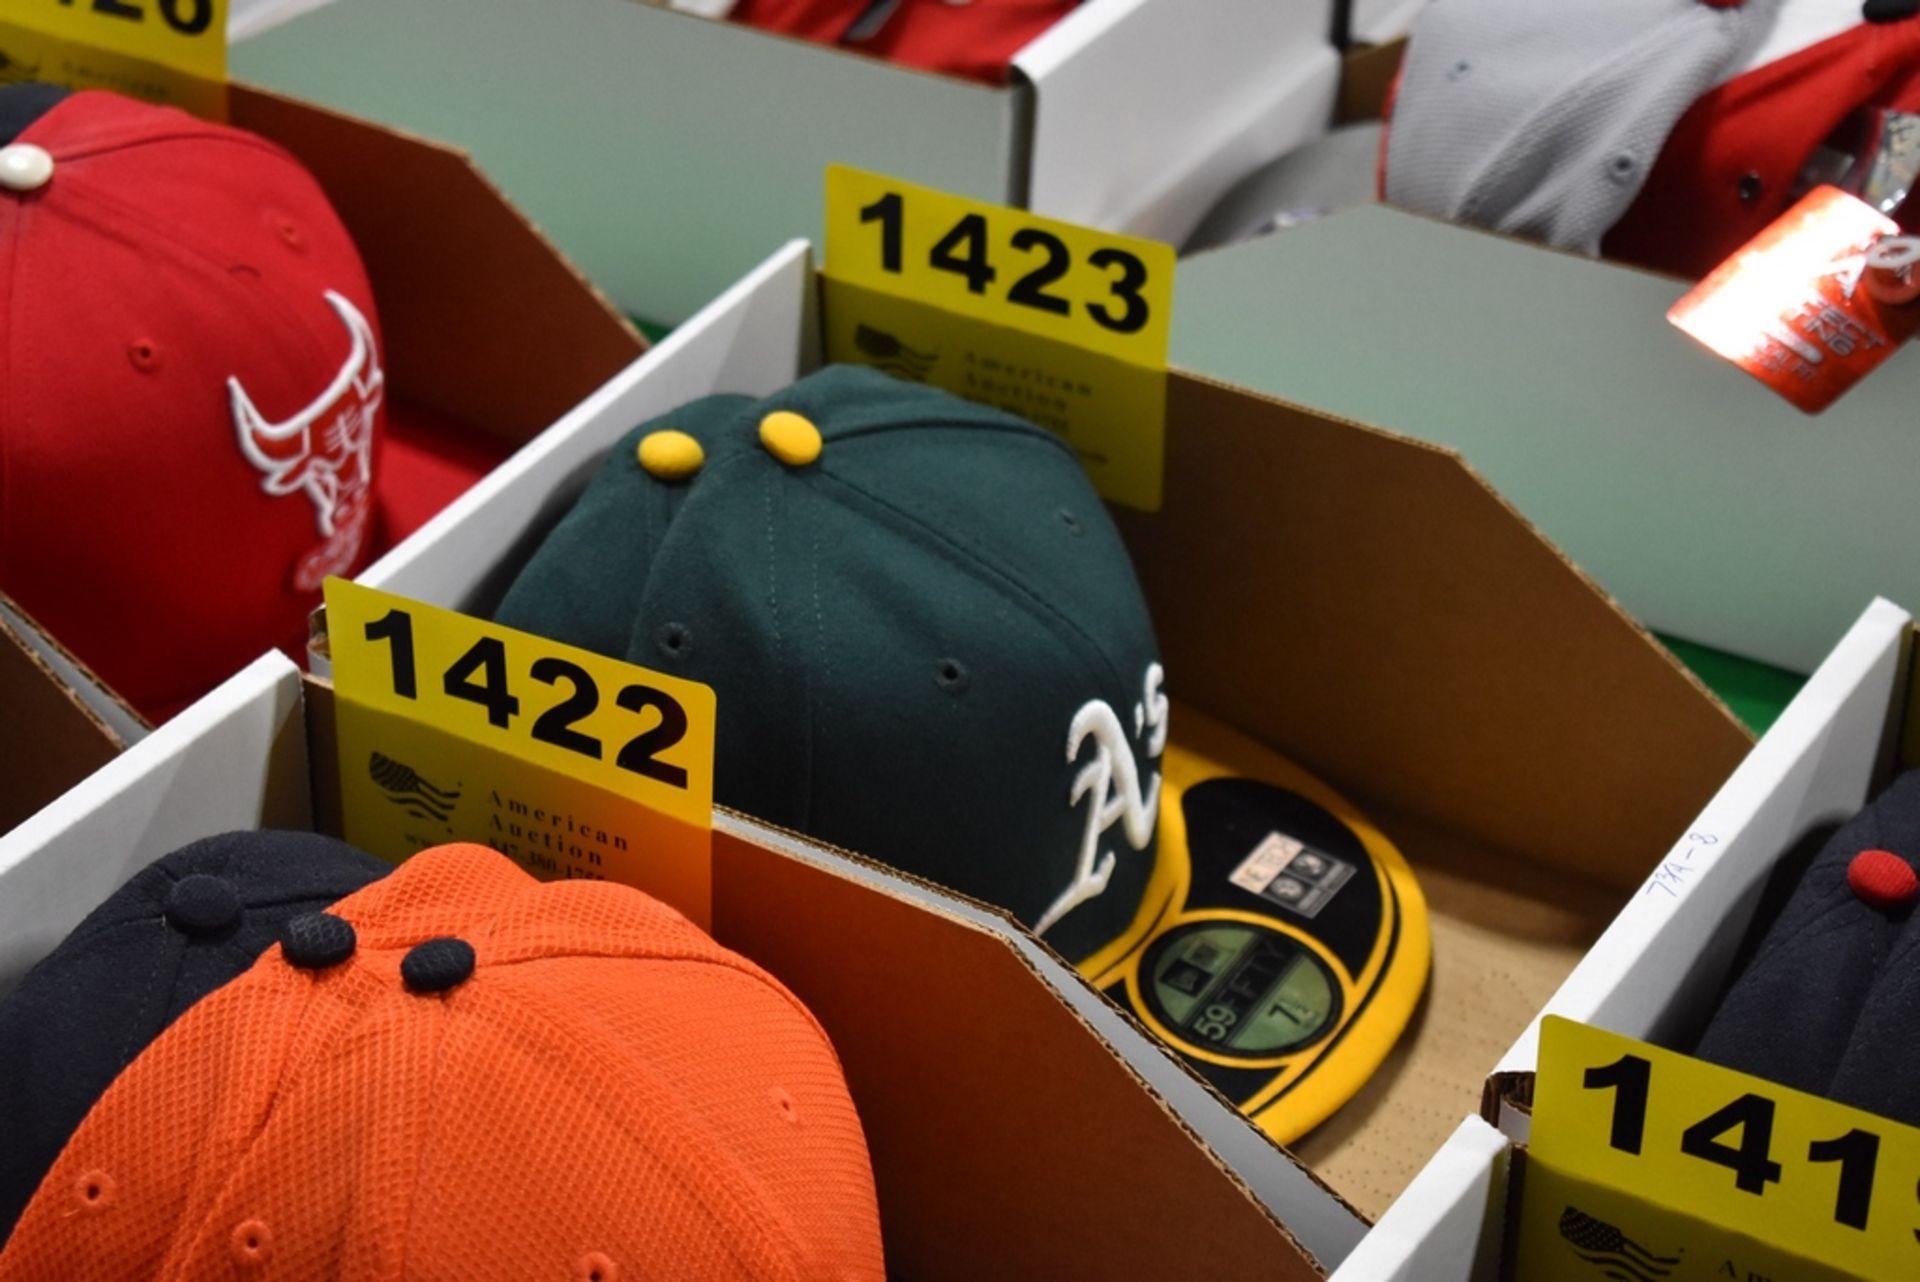 (2) OAKLAND A'S BALL CAPS, SIZES 7-1/2 & 7-5/8